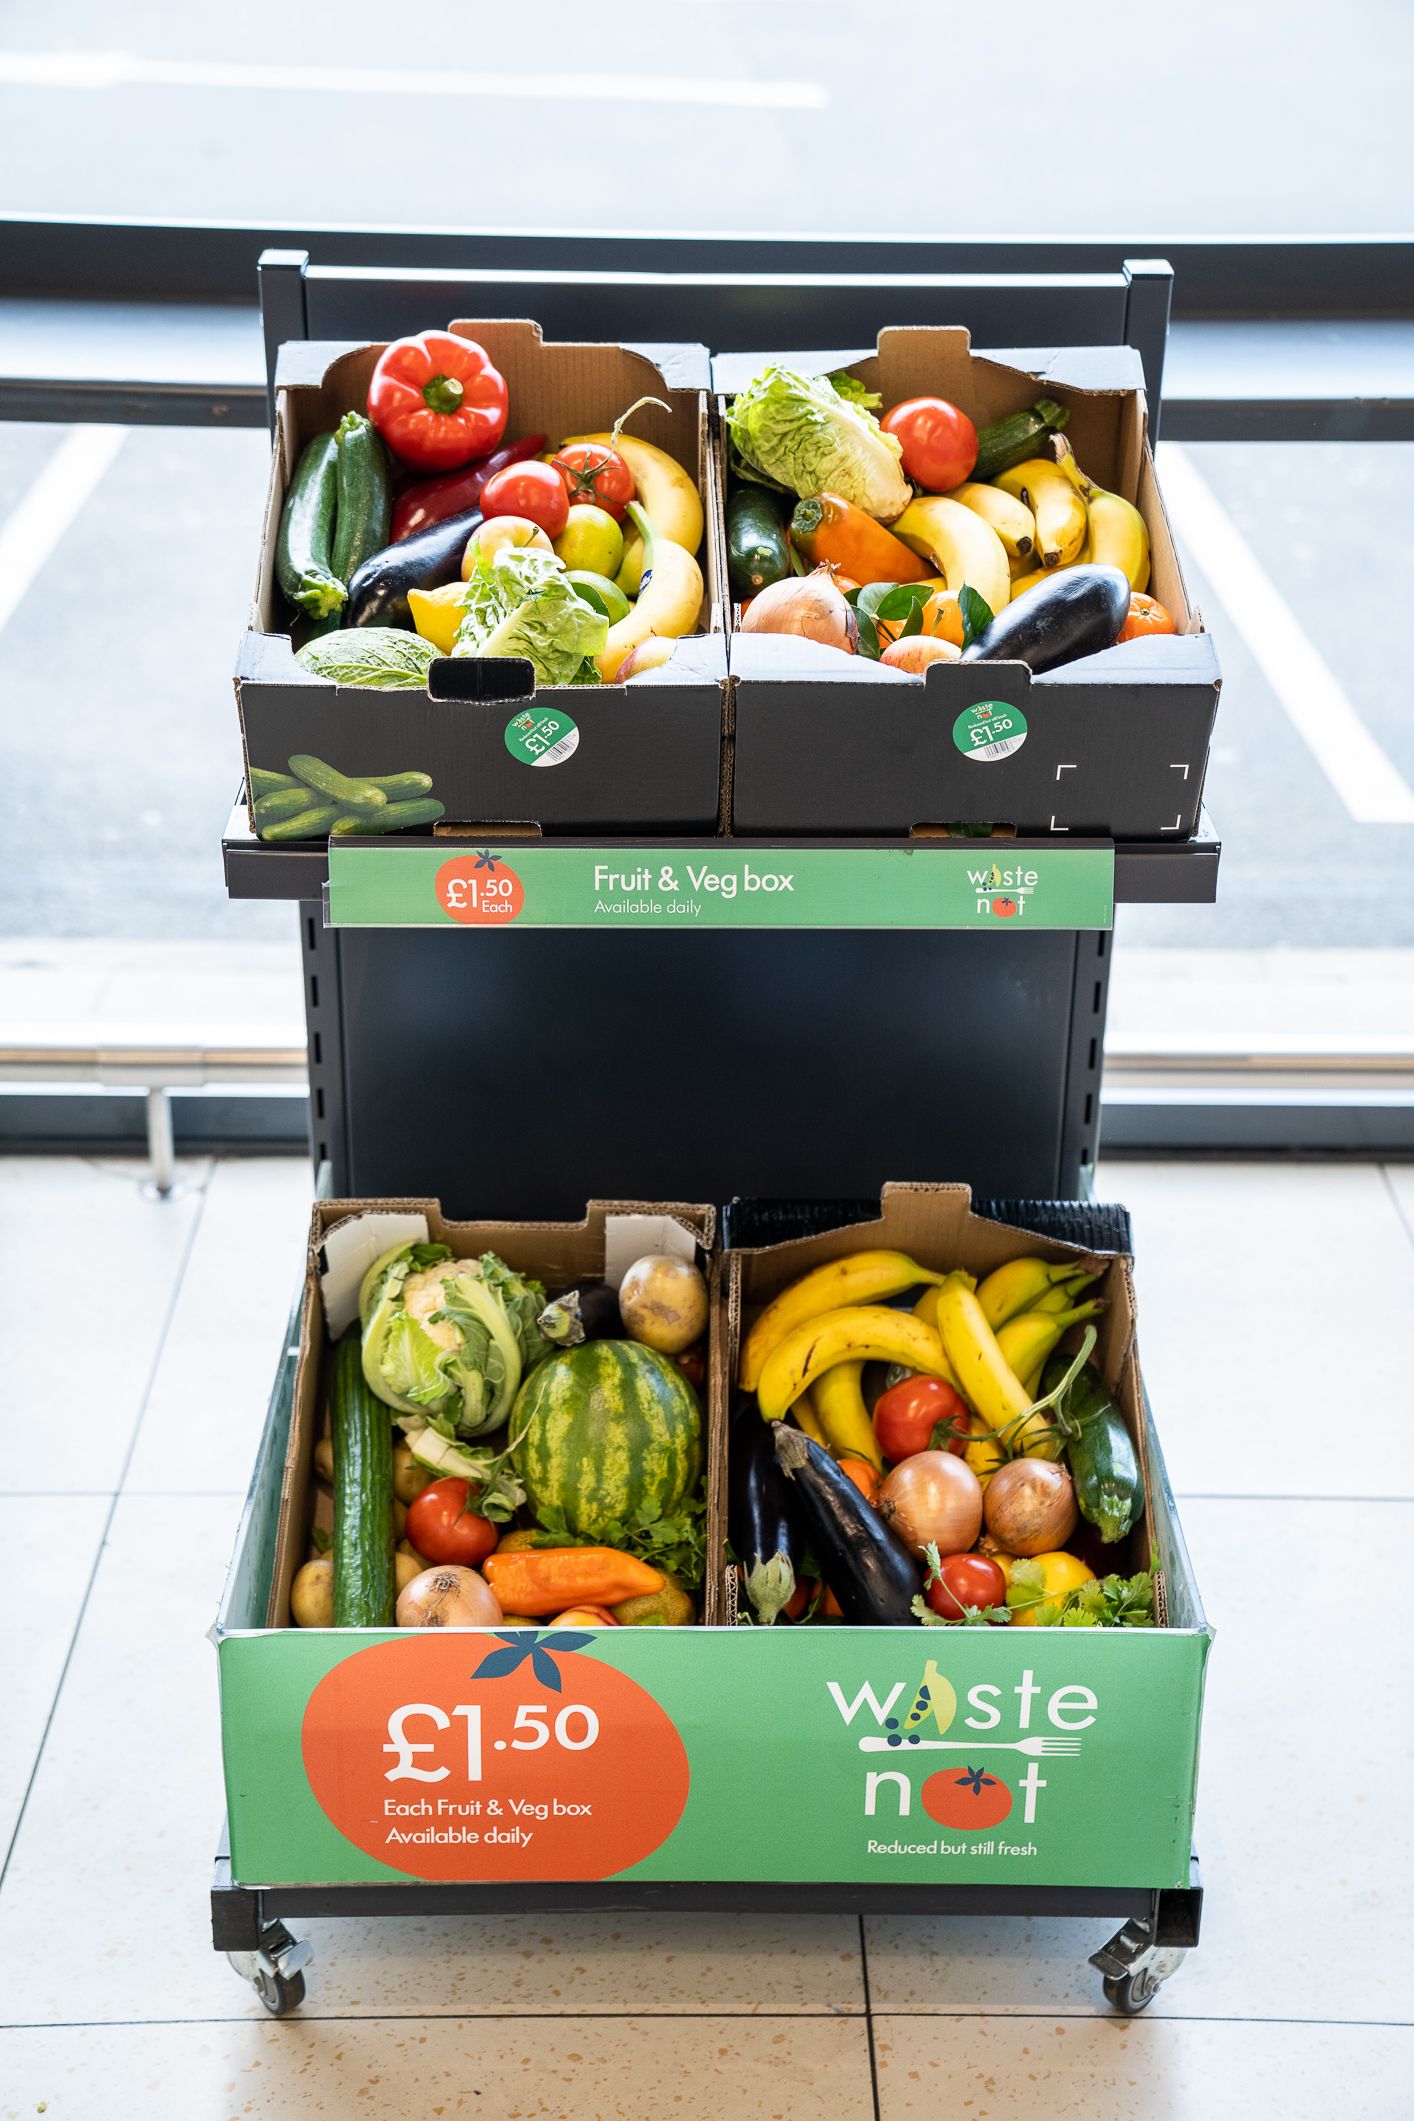 Vlucht impuls Uittrekken You Can Now Buy Lidl's £1.50 'Too Good To Waste' Veg Box In All Stores  Nationwide